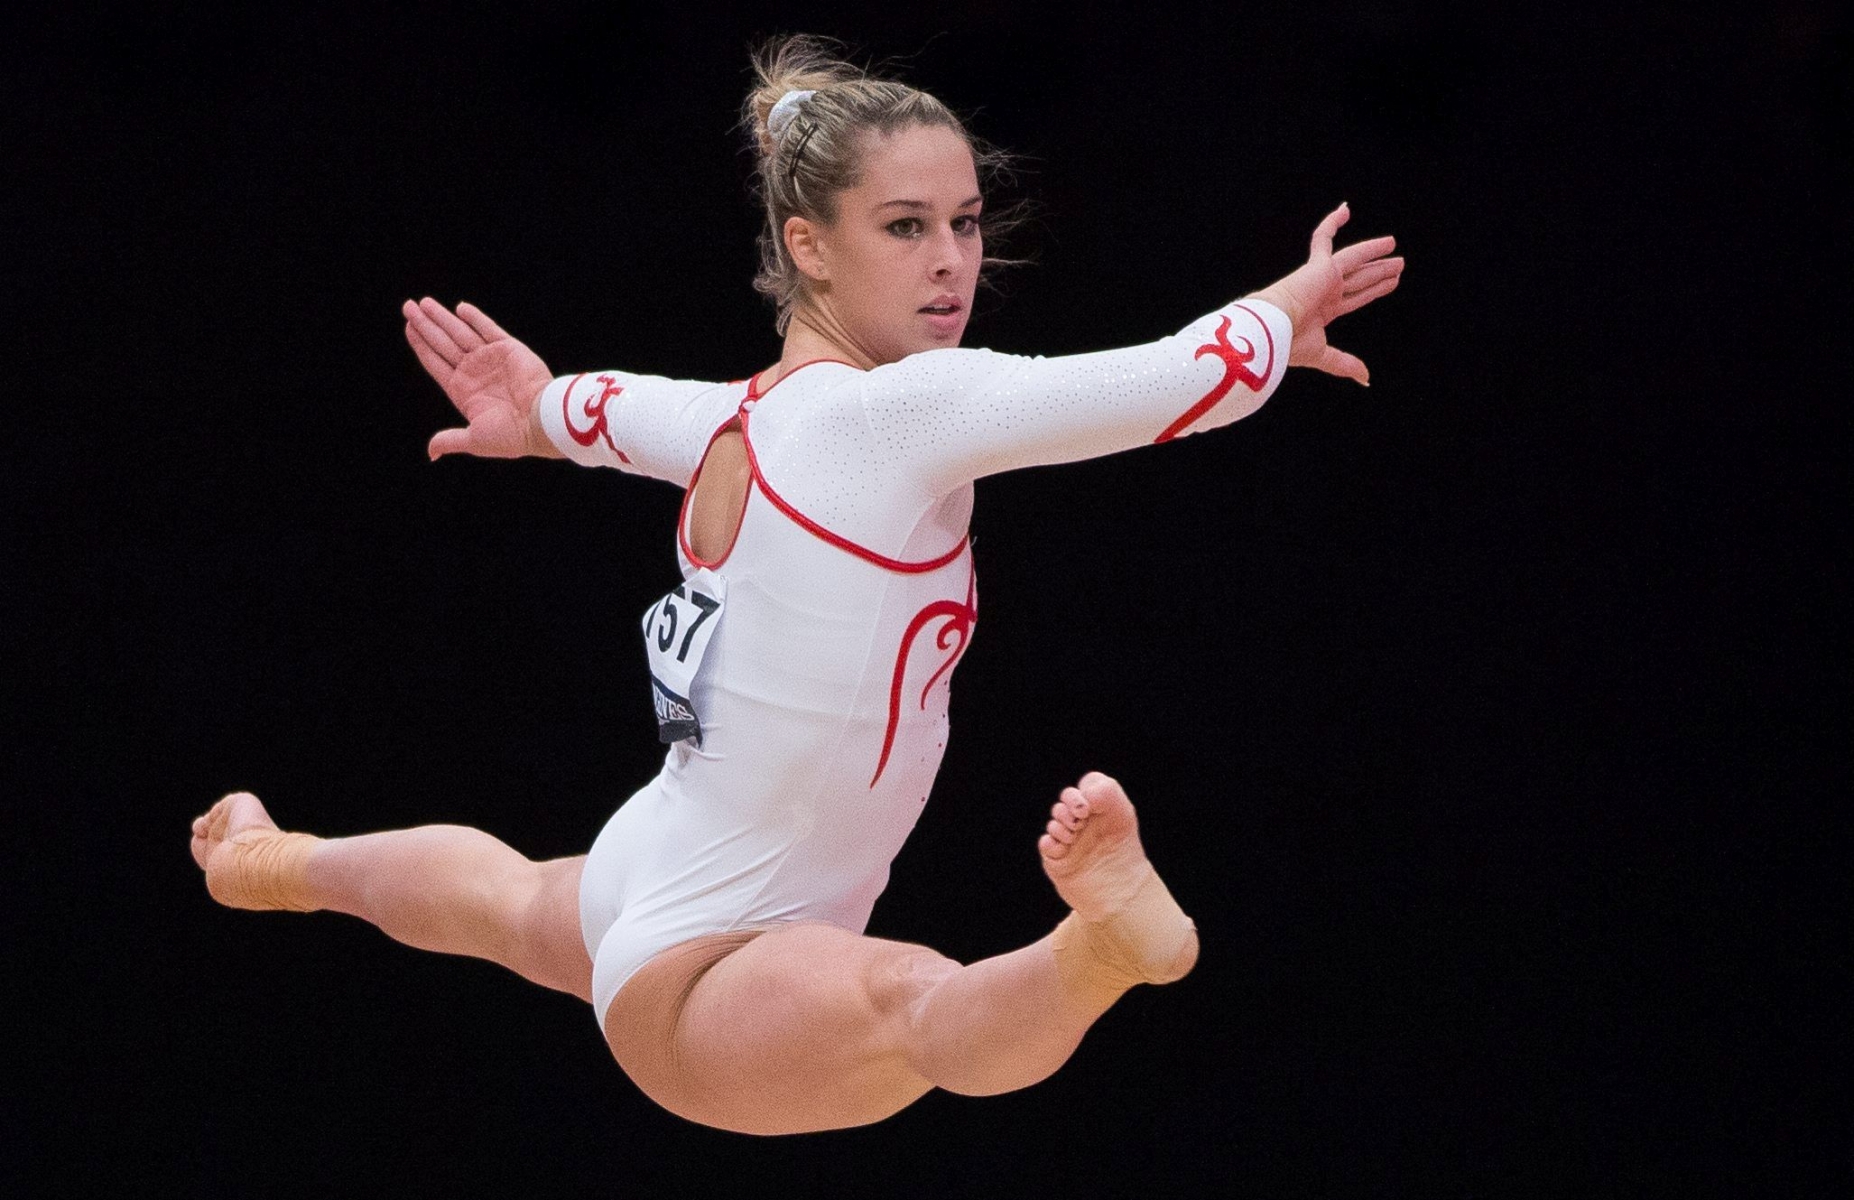 Giulia Steingruber of Switzerland performs on the floor during the women's qualifications on day two at the 46th FIG Artistic Gymnastics World Championships in Glasgow, Britain, 24 October 2015.  EPA/ANDREW COWIE